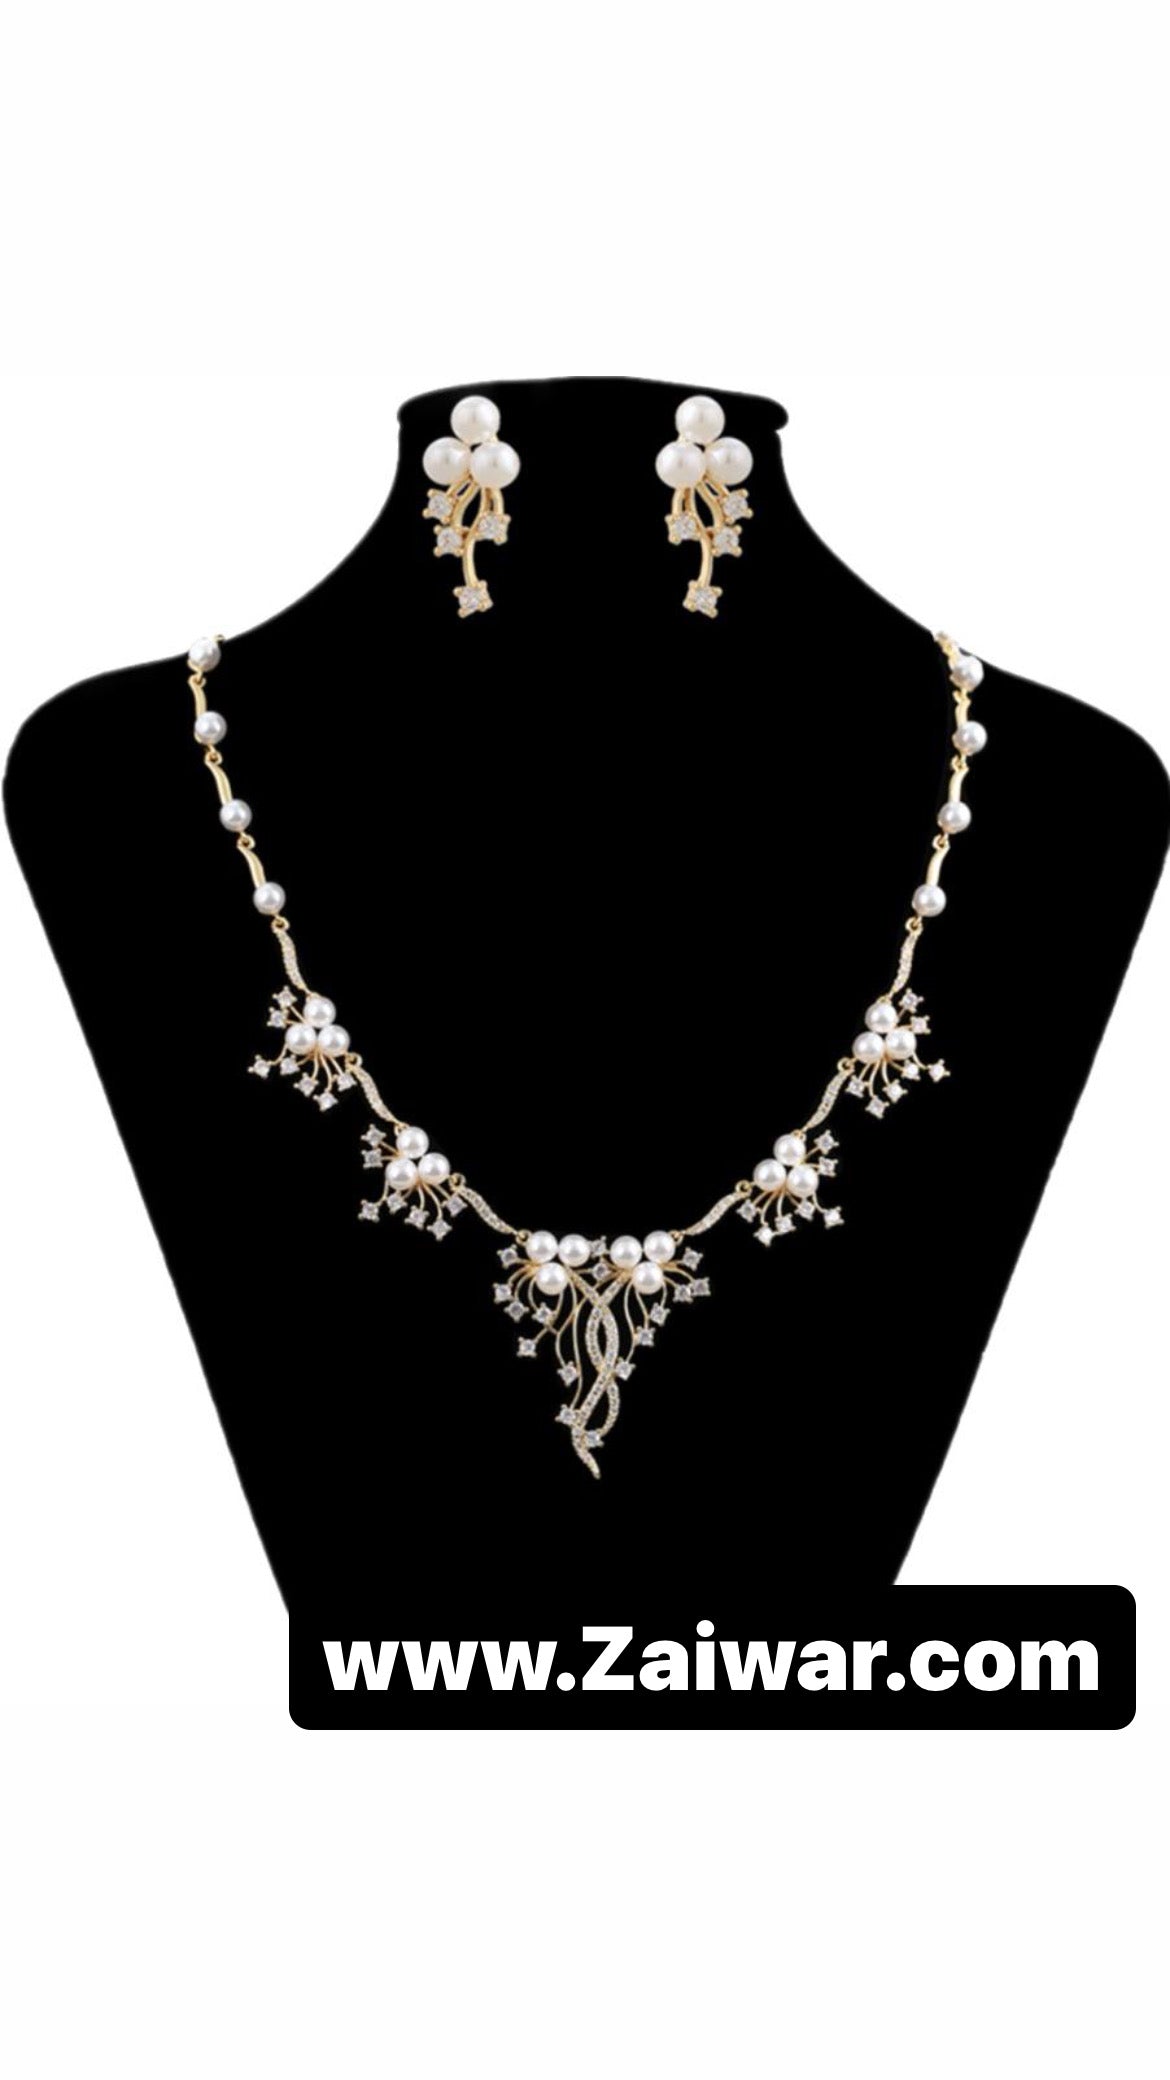 3 Pearls Earrings And Necklace Set